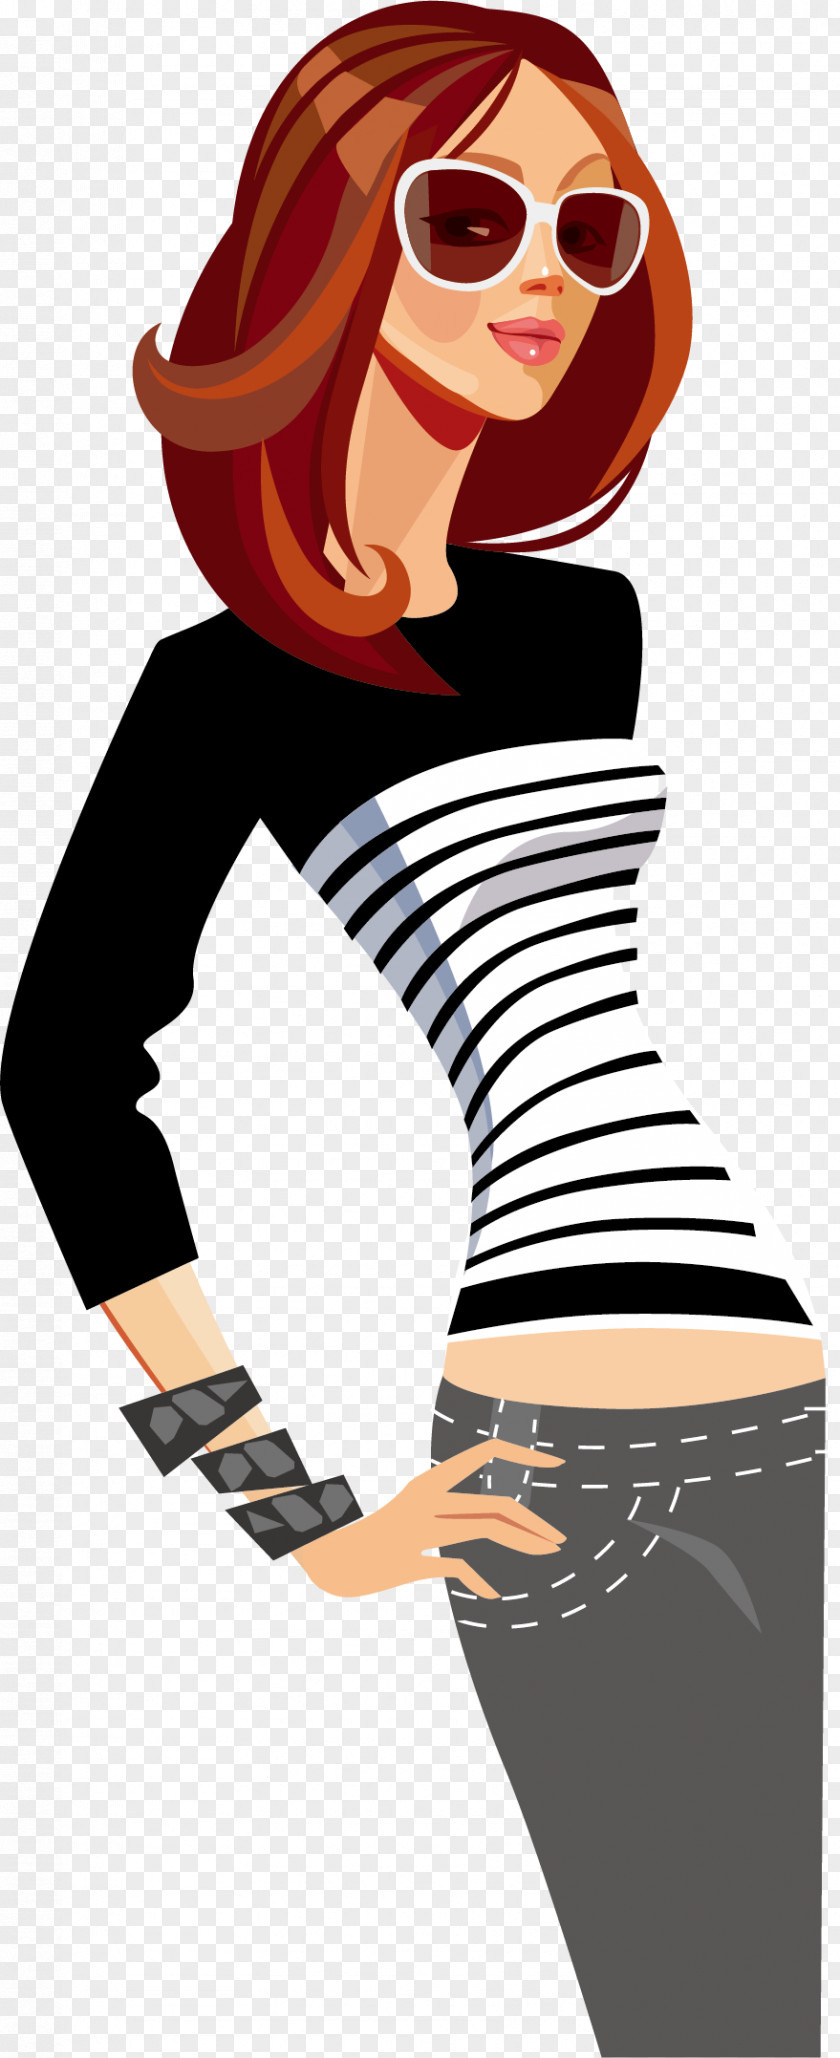 Fashion Model Girl Illustration PNG Illustration, with sunglasses, red-haired female illustration clipart PNG